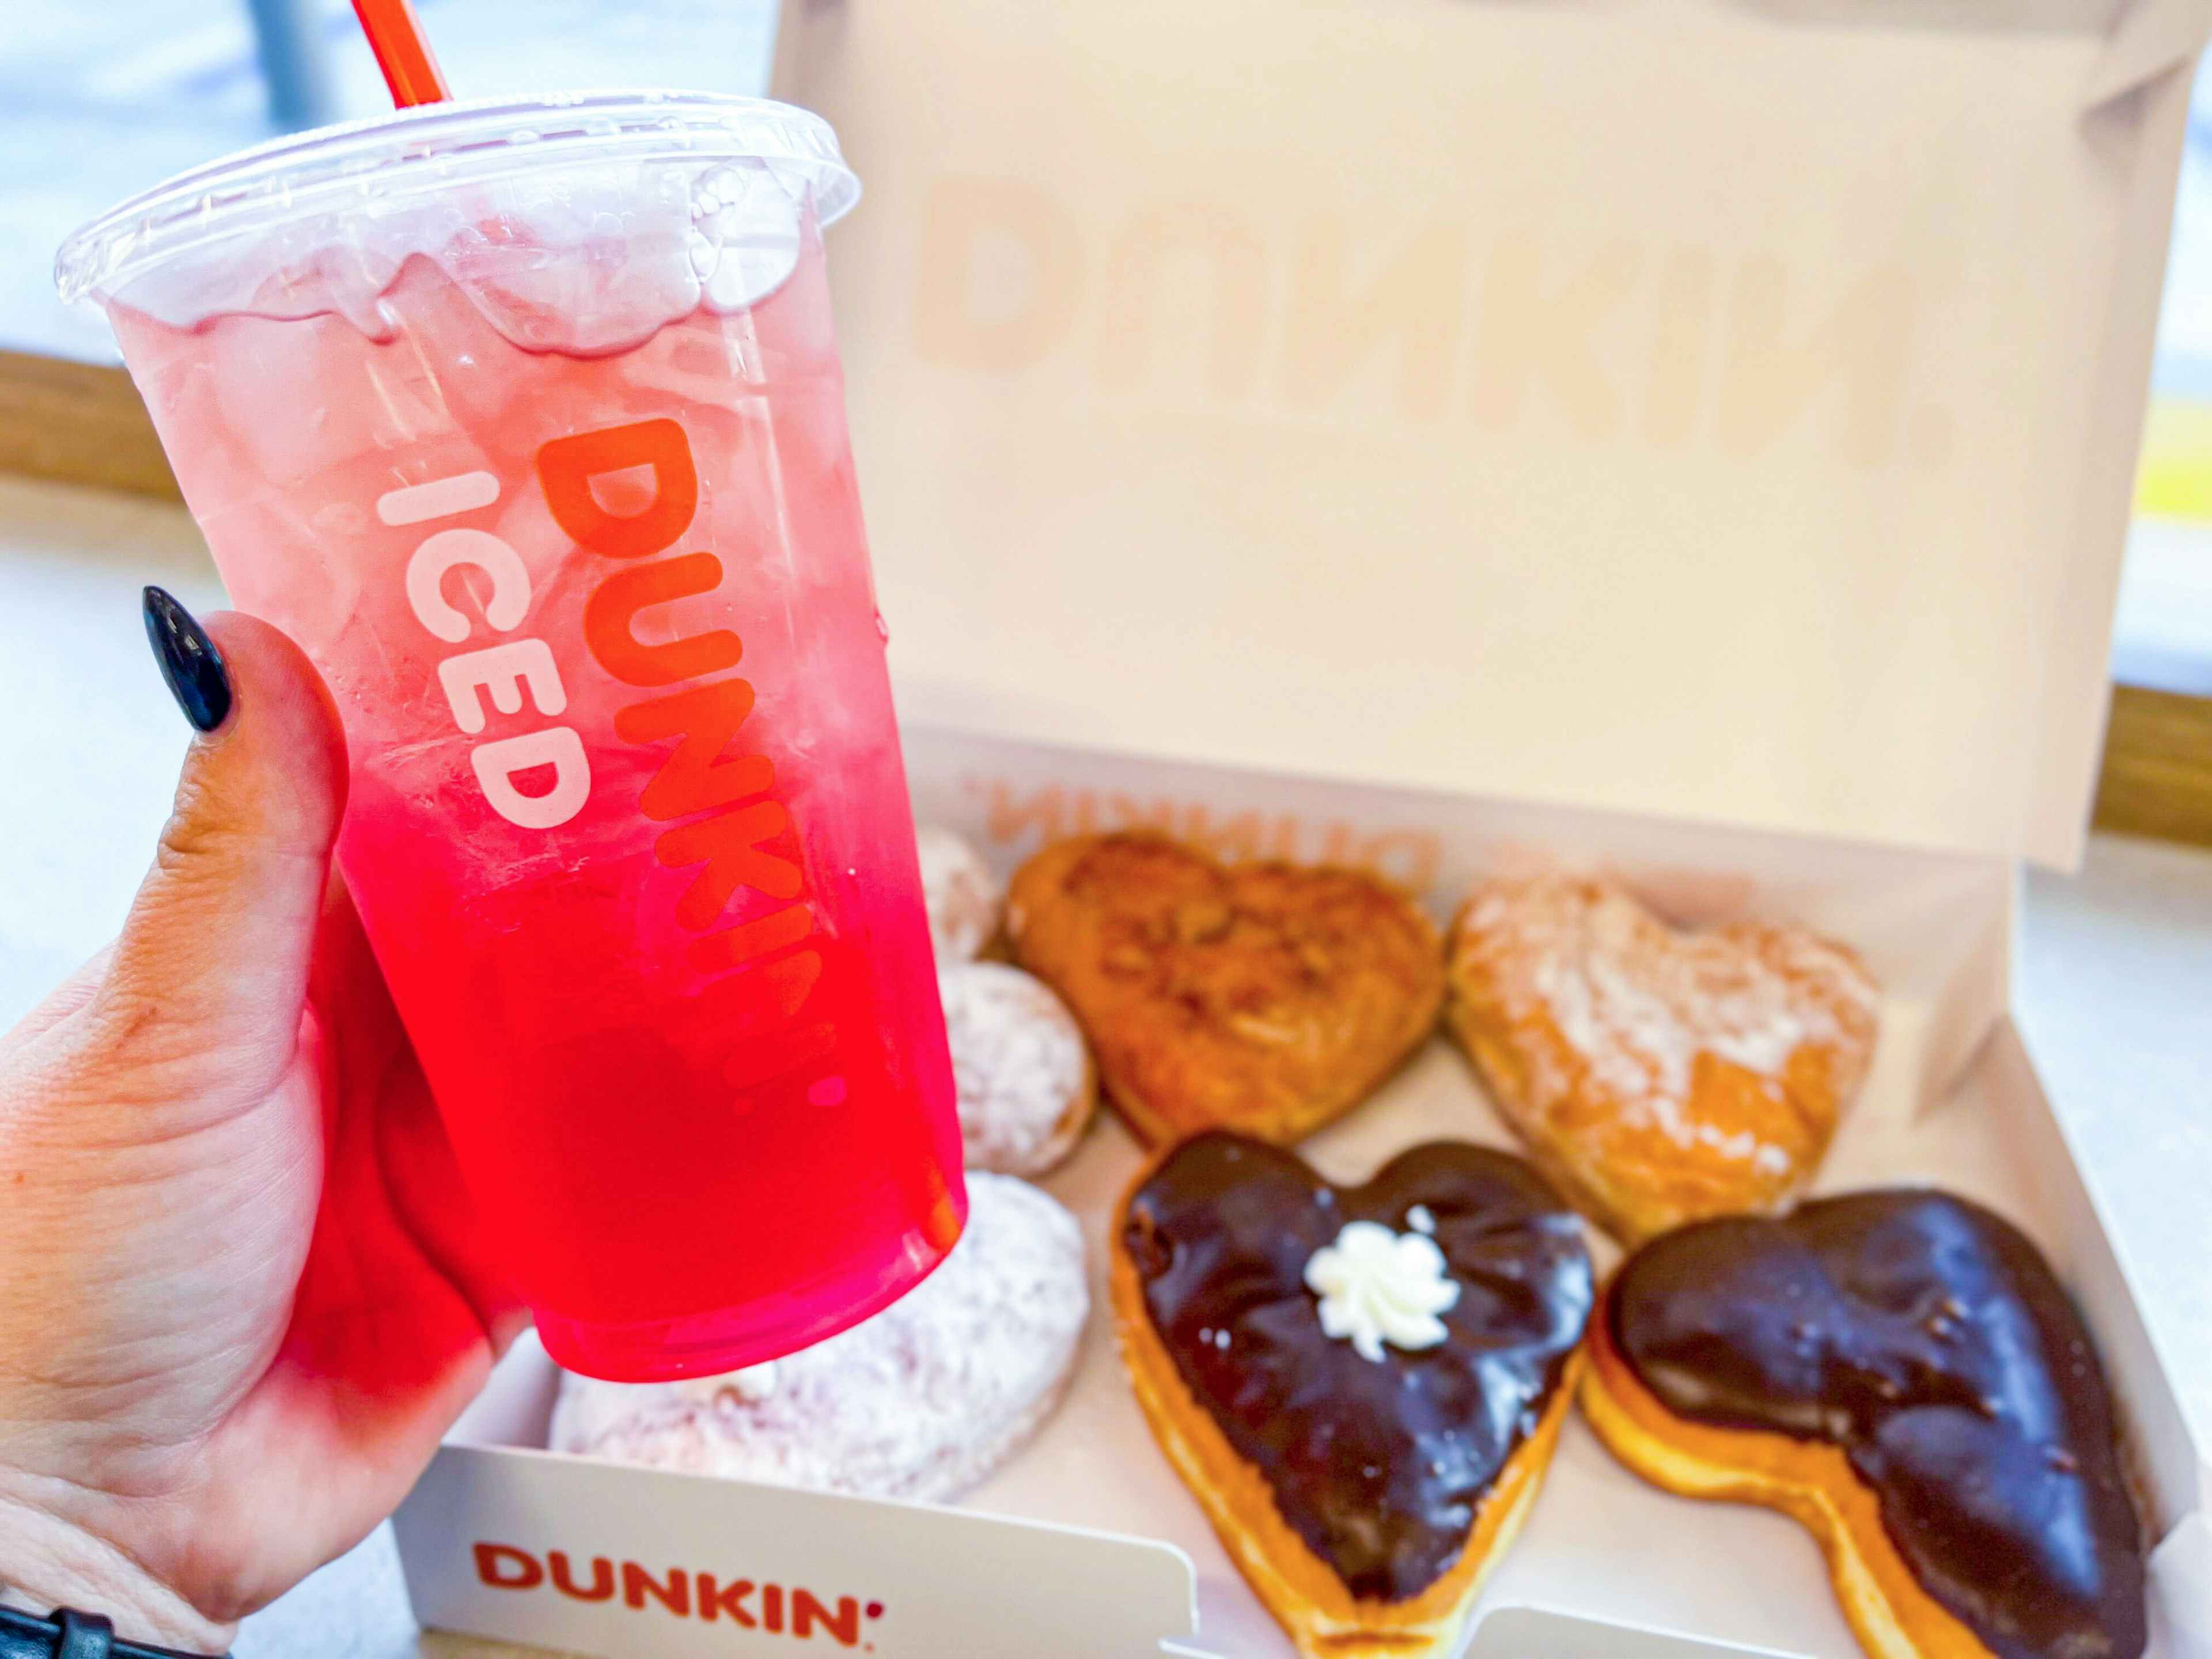 dunkin-valentines-day-menu-heart-donuts-strawberry-dragonfruit-kcl-02